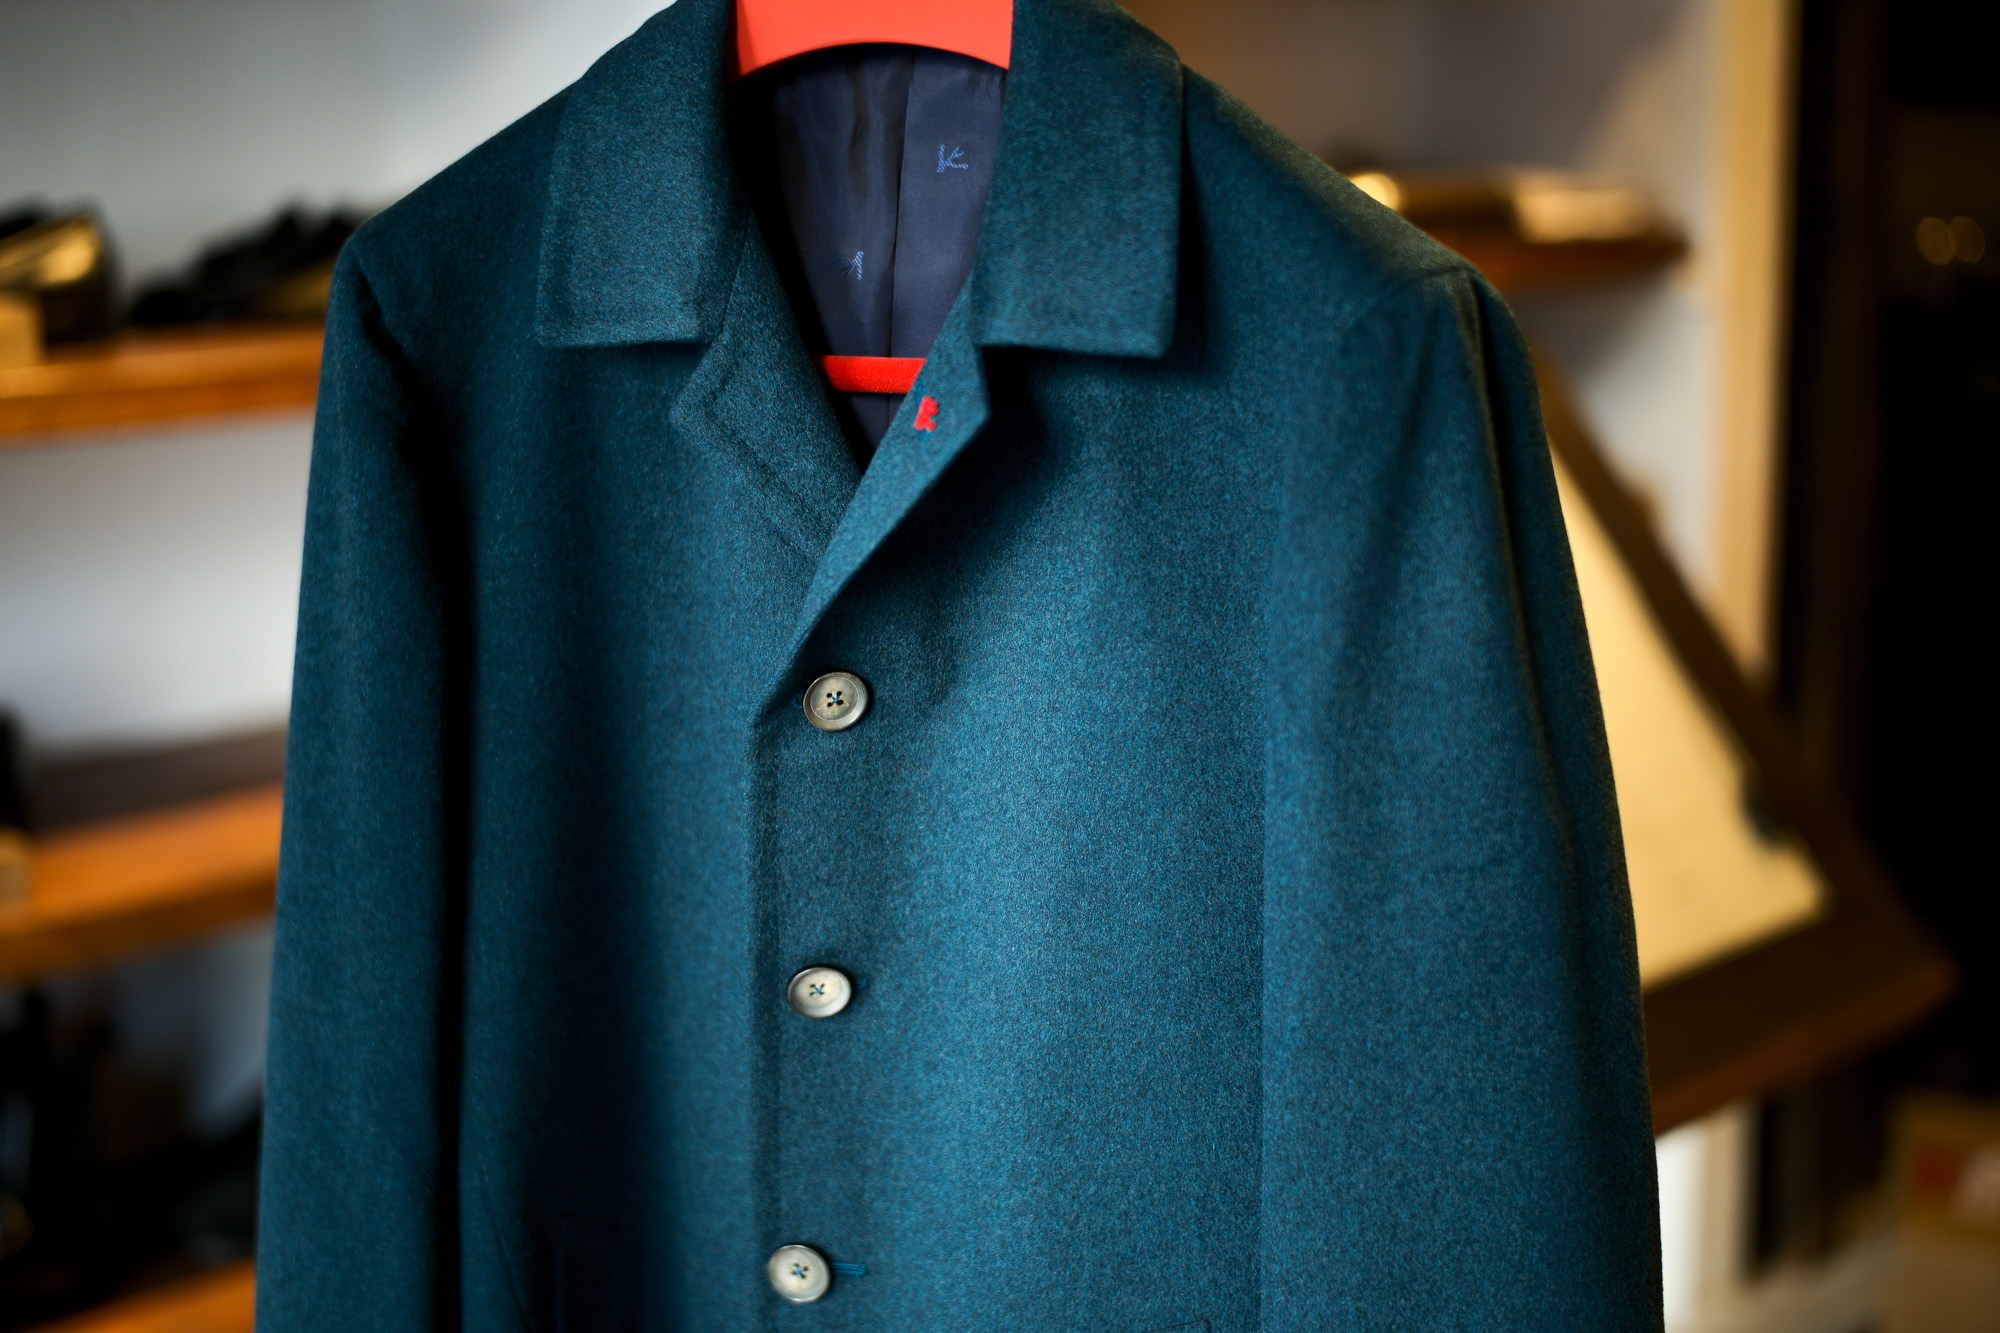 ISAIA "MADE TO MEASURE" CAPPOTTO "Cashmere" BLUE GREEN 2022AW イザイア オーダー 受注会 カポット カシミヤ カーコート ブルーグリーン 愛知 名古屋　Alto e Diritto altoediritto アルトエデリット